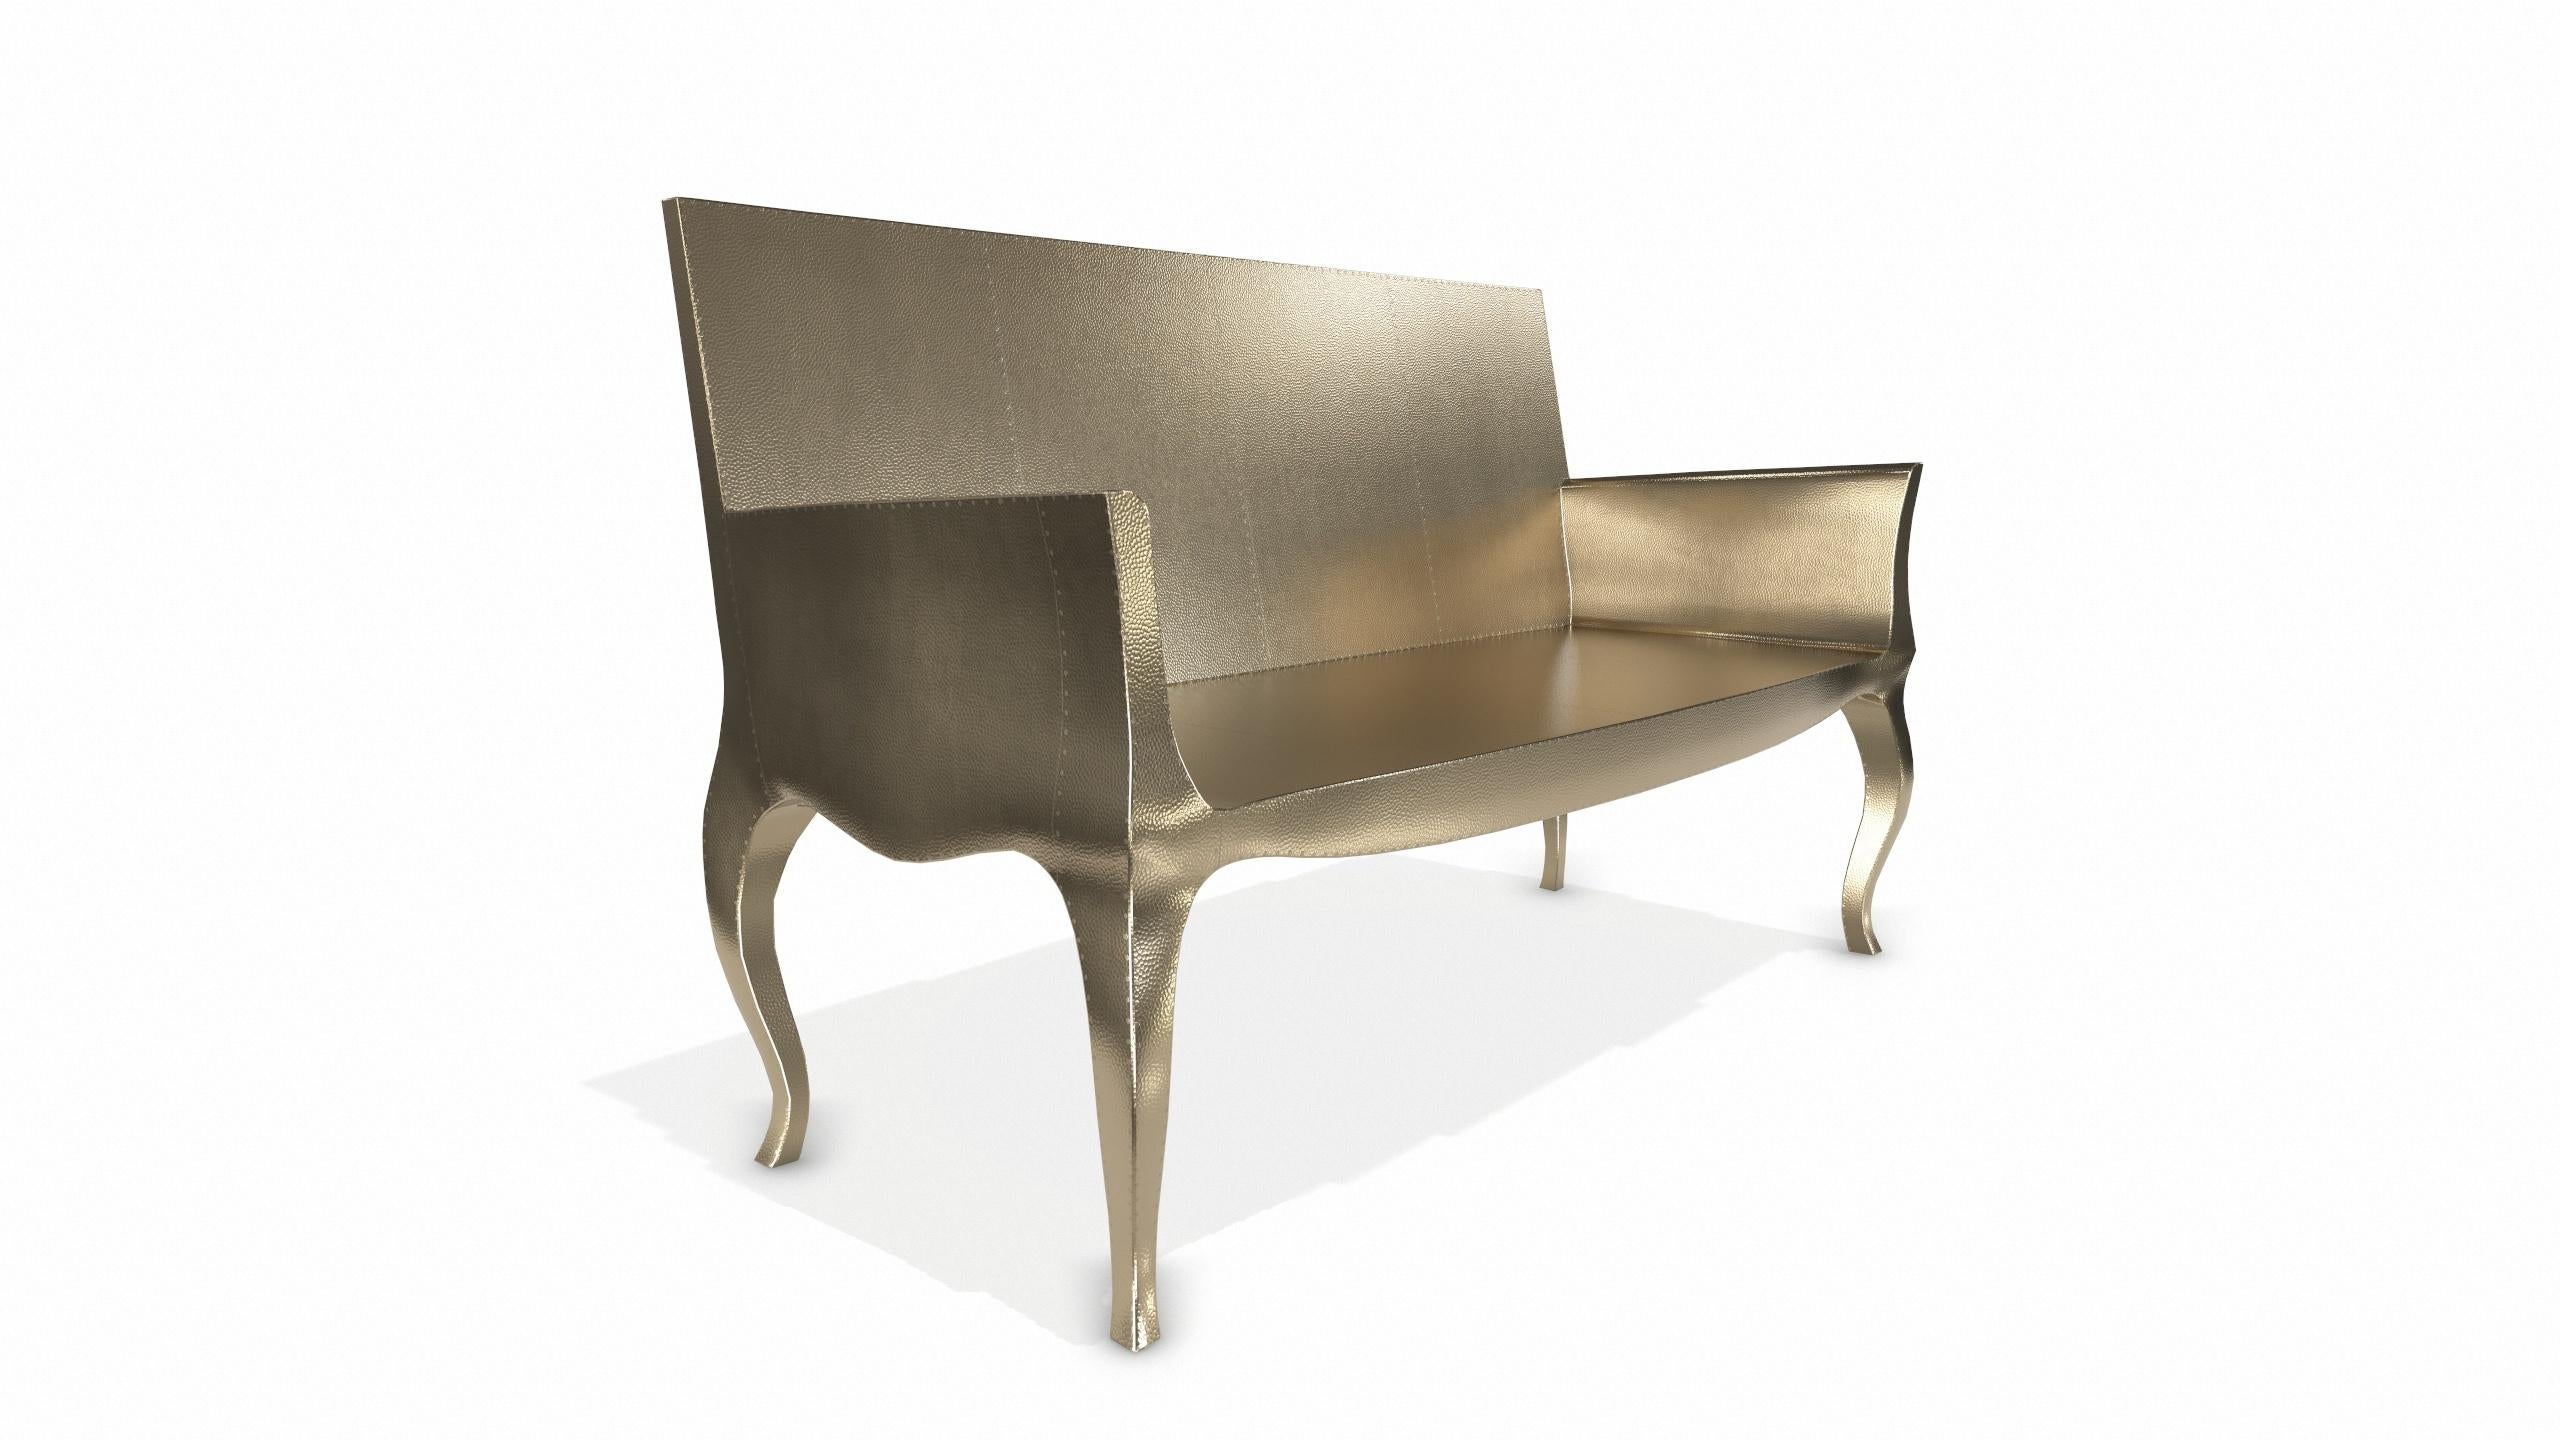 Louise Settee Art Deco Living Room Sets in Mid. Hammered Brass by Paul Mathieu In New Condition For Sale In New York, NY